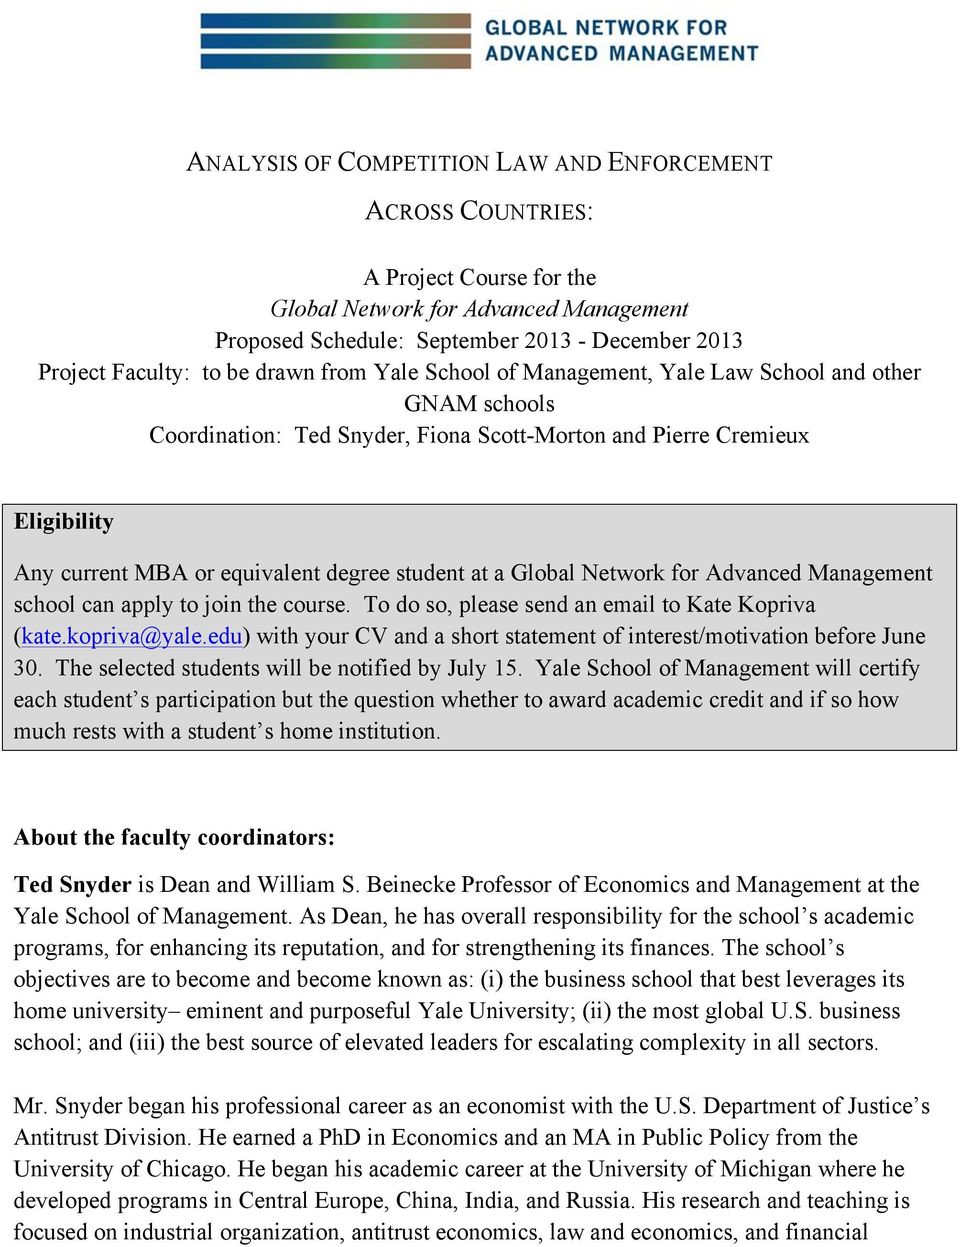 at a Global Network for Advanced Management school can apply to join the course. To do so, please send an email to Kate Kopriva (kate.kopriva@yale.